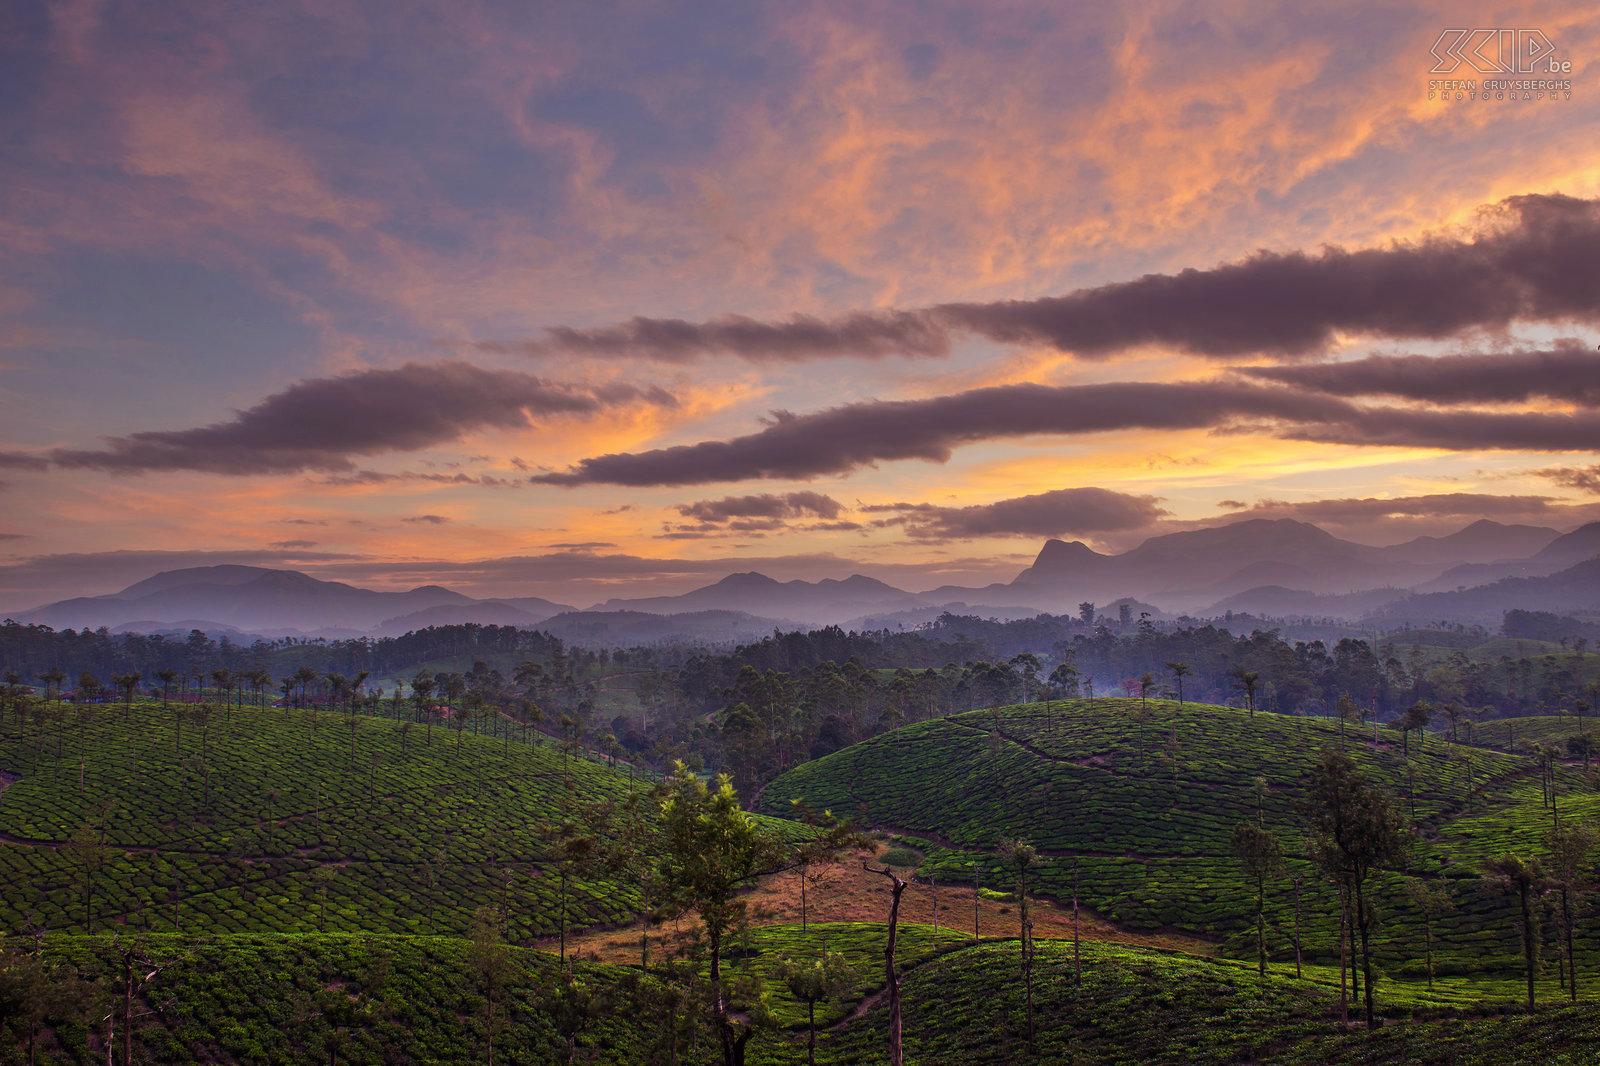 Valparai - Sunrise tea fields Sunrise between the tea fields in Valparai, one of the most beautiful hill stations. Valparai It is located 1100m above sea level on the Anaimalai Hills range of the Western Ghats in the state Tamil Nadu in south India. Stefan Cruysberghs